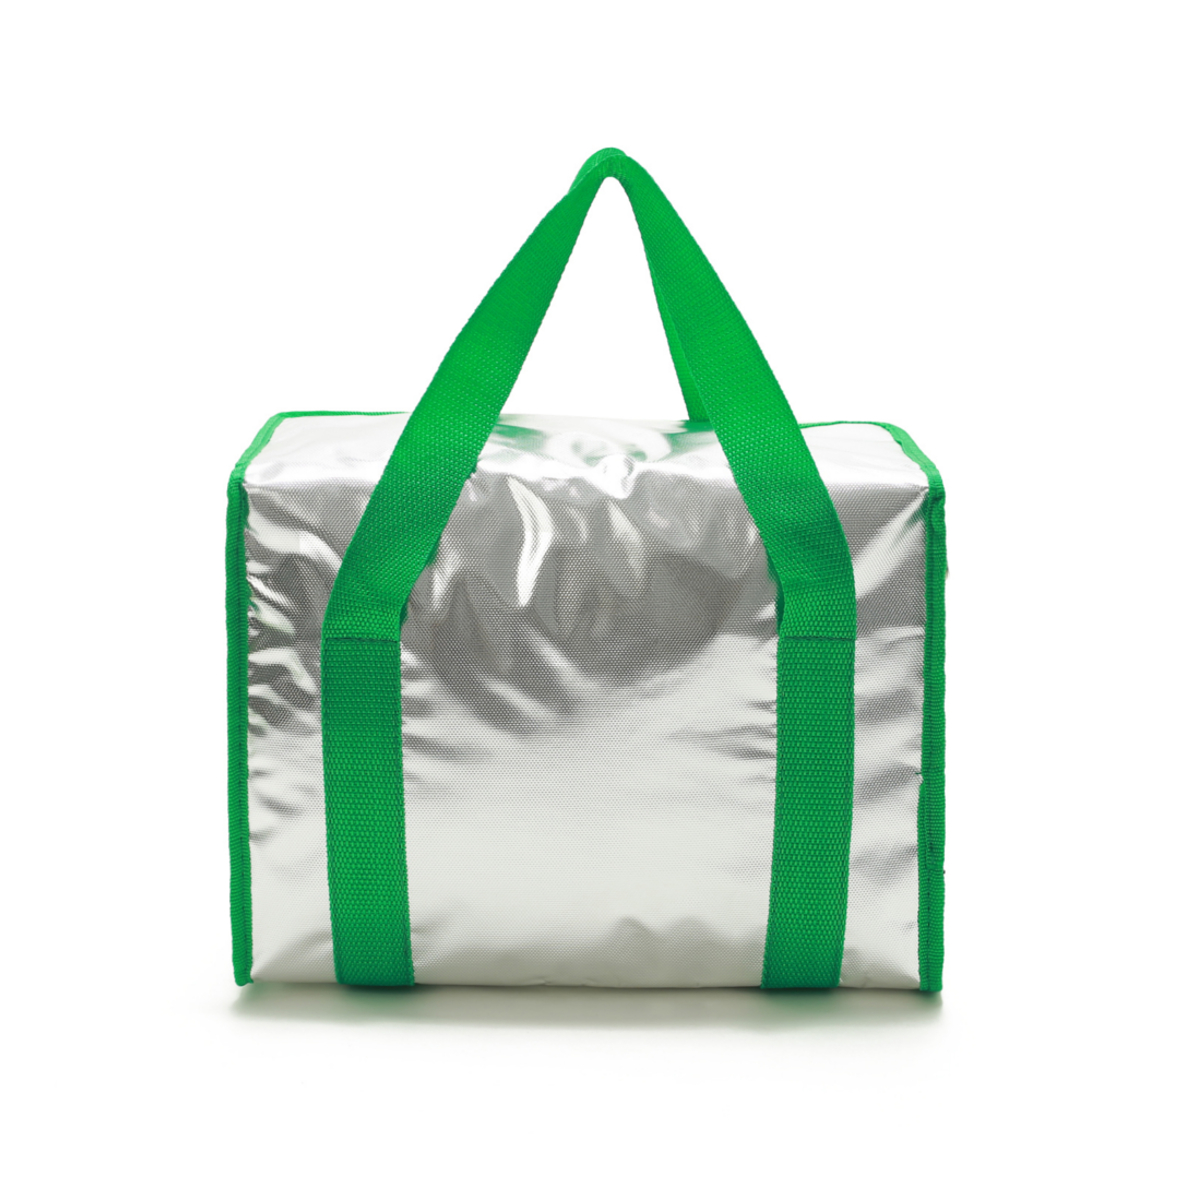 81626L-Picnic-Bag-Food-Delivery-Insulated-Bag-Lunch-Box-Storage-Bag-Outdoor-Camping-Travel-1855998-10